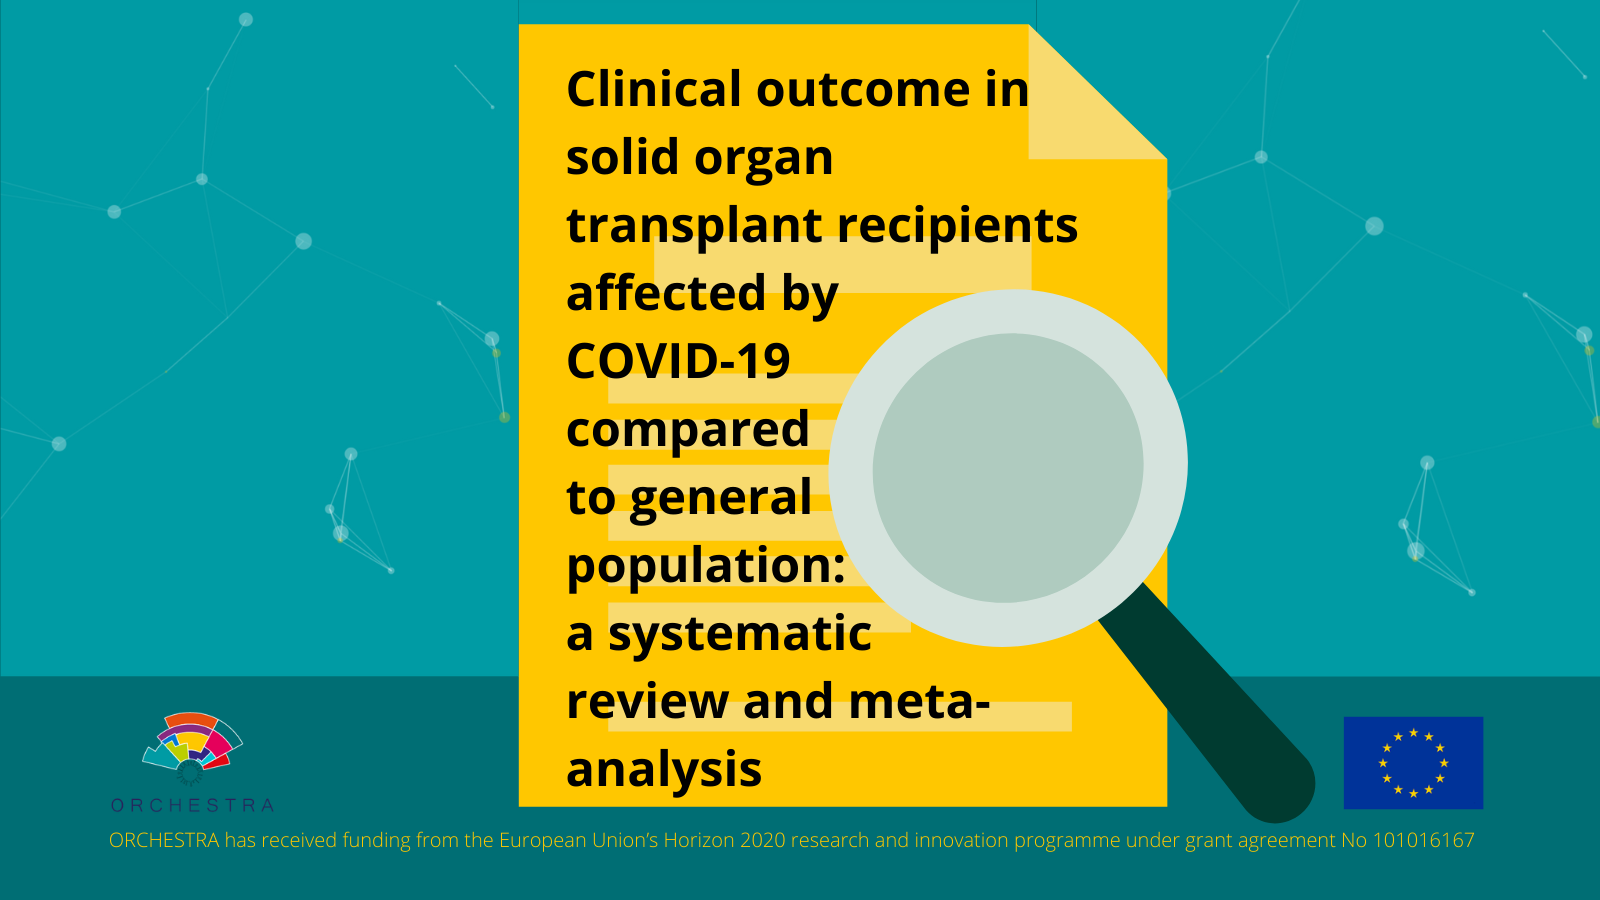 Clinical outcome in solid organ transplant recipients affected by COVID